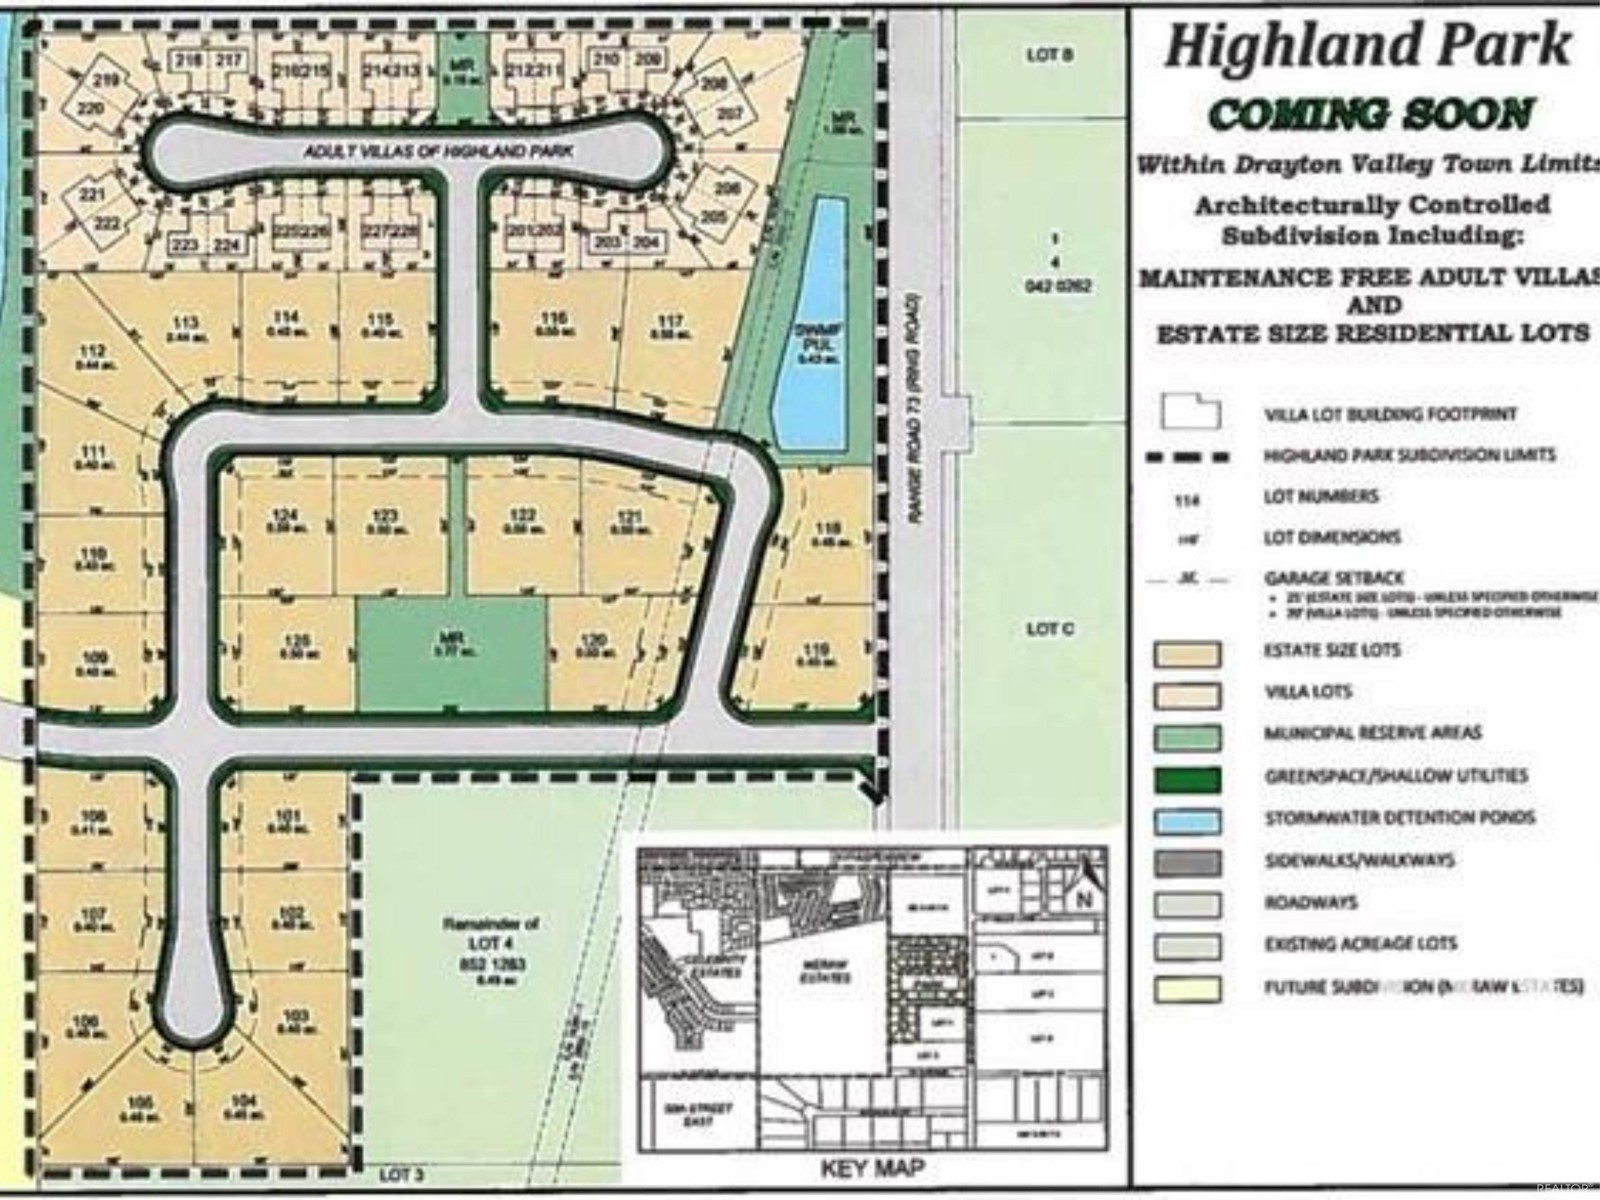 Vacant Land For Sale | Highland Park | Drayton Valley | T7A1G5